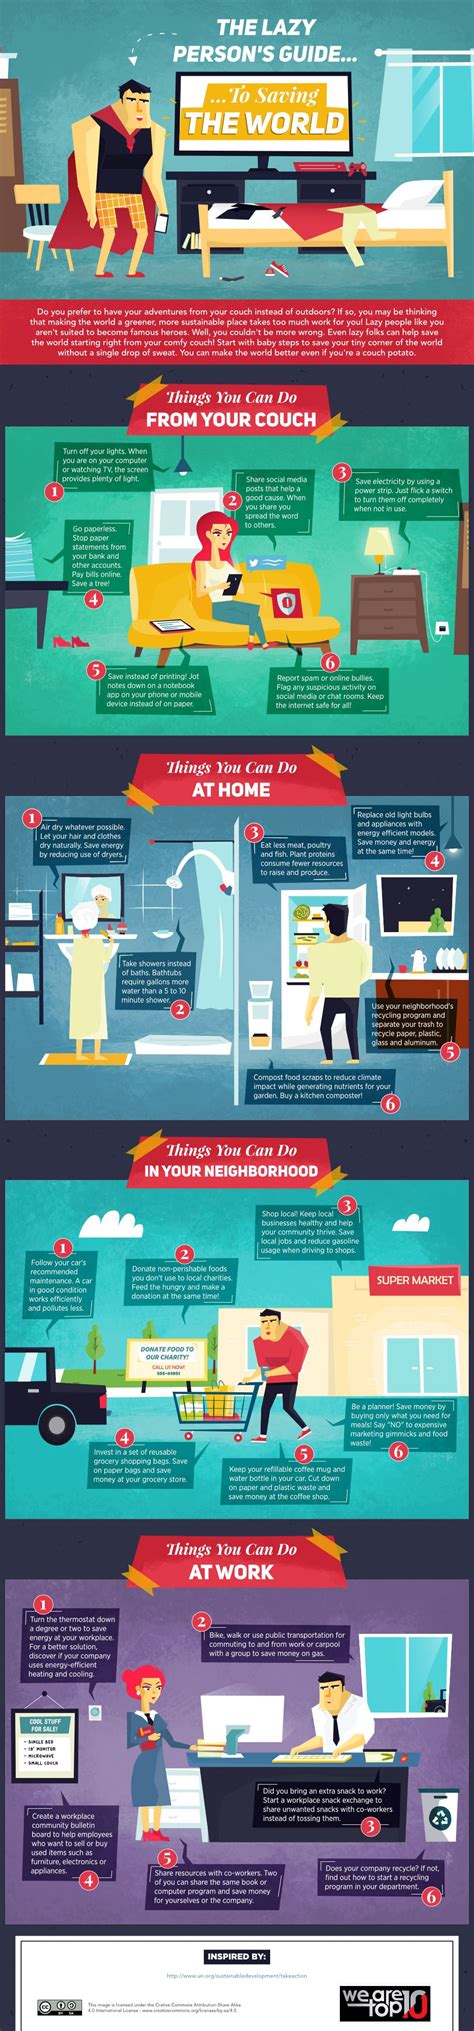 Lazy Persons Guide To Saving The World Infographic Greener Ideal